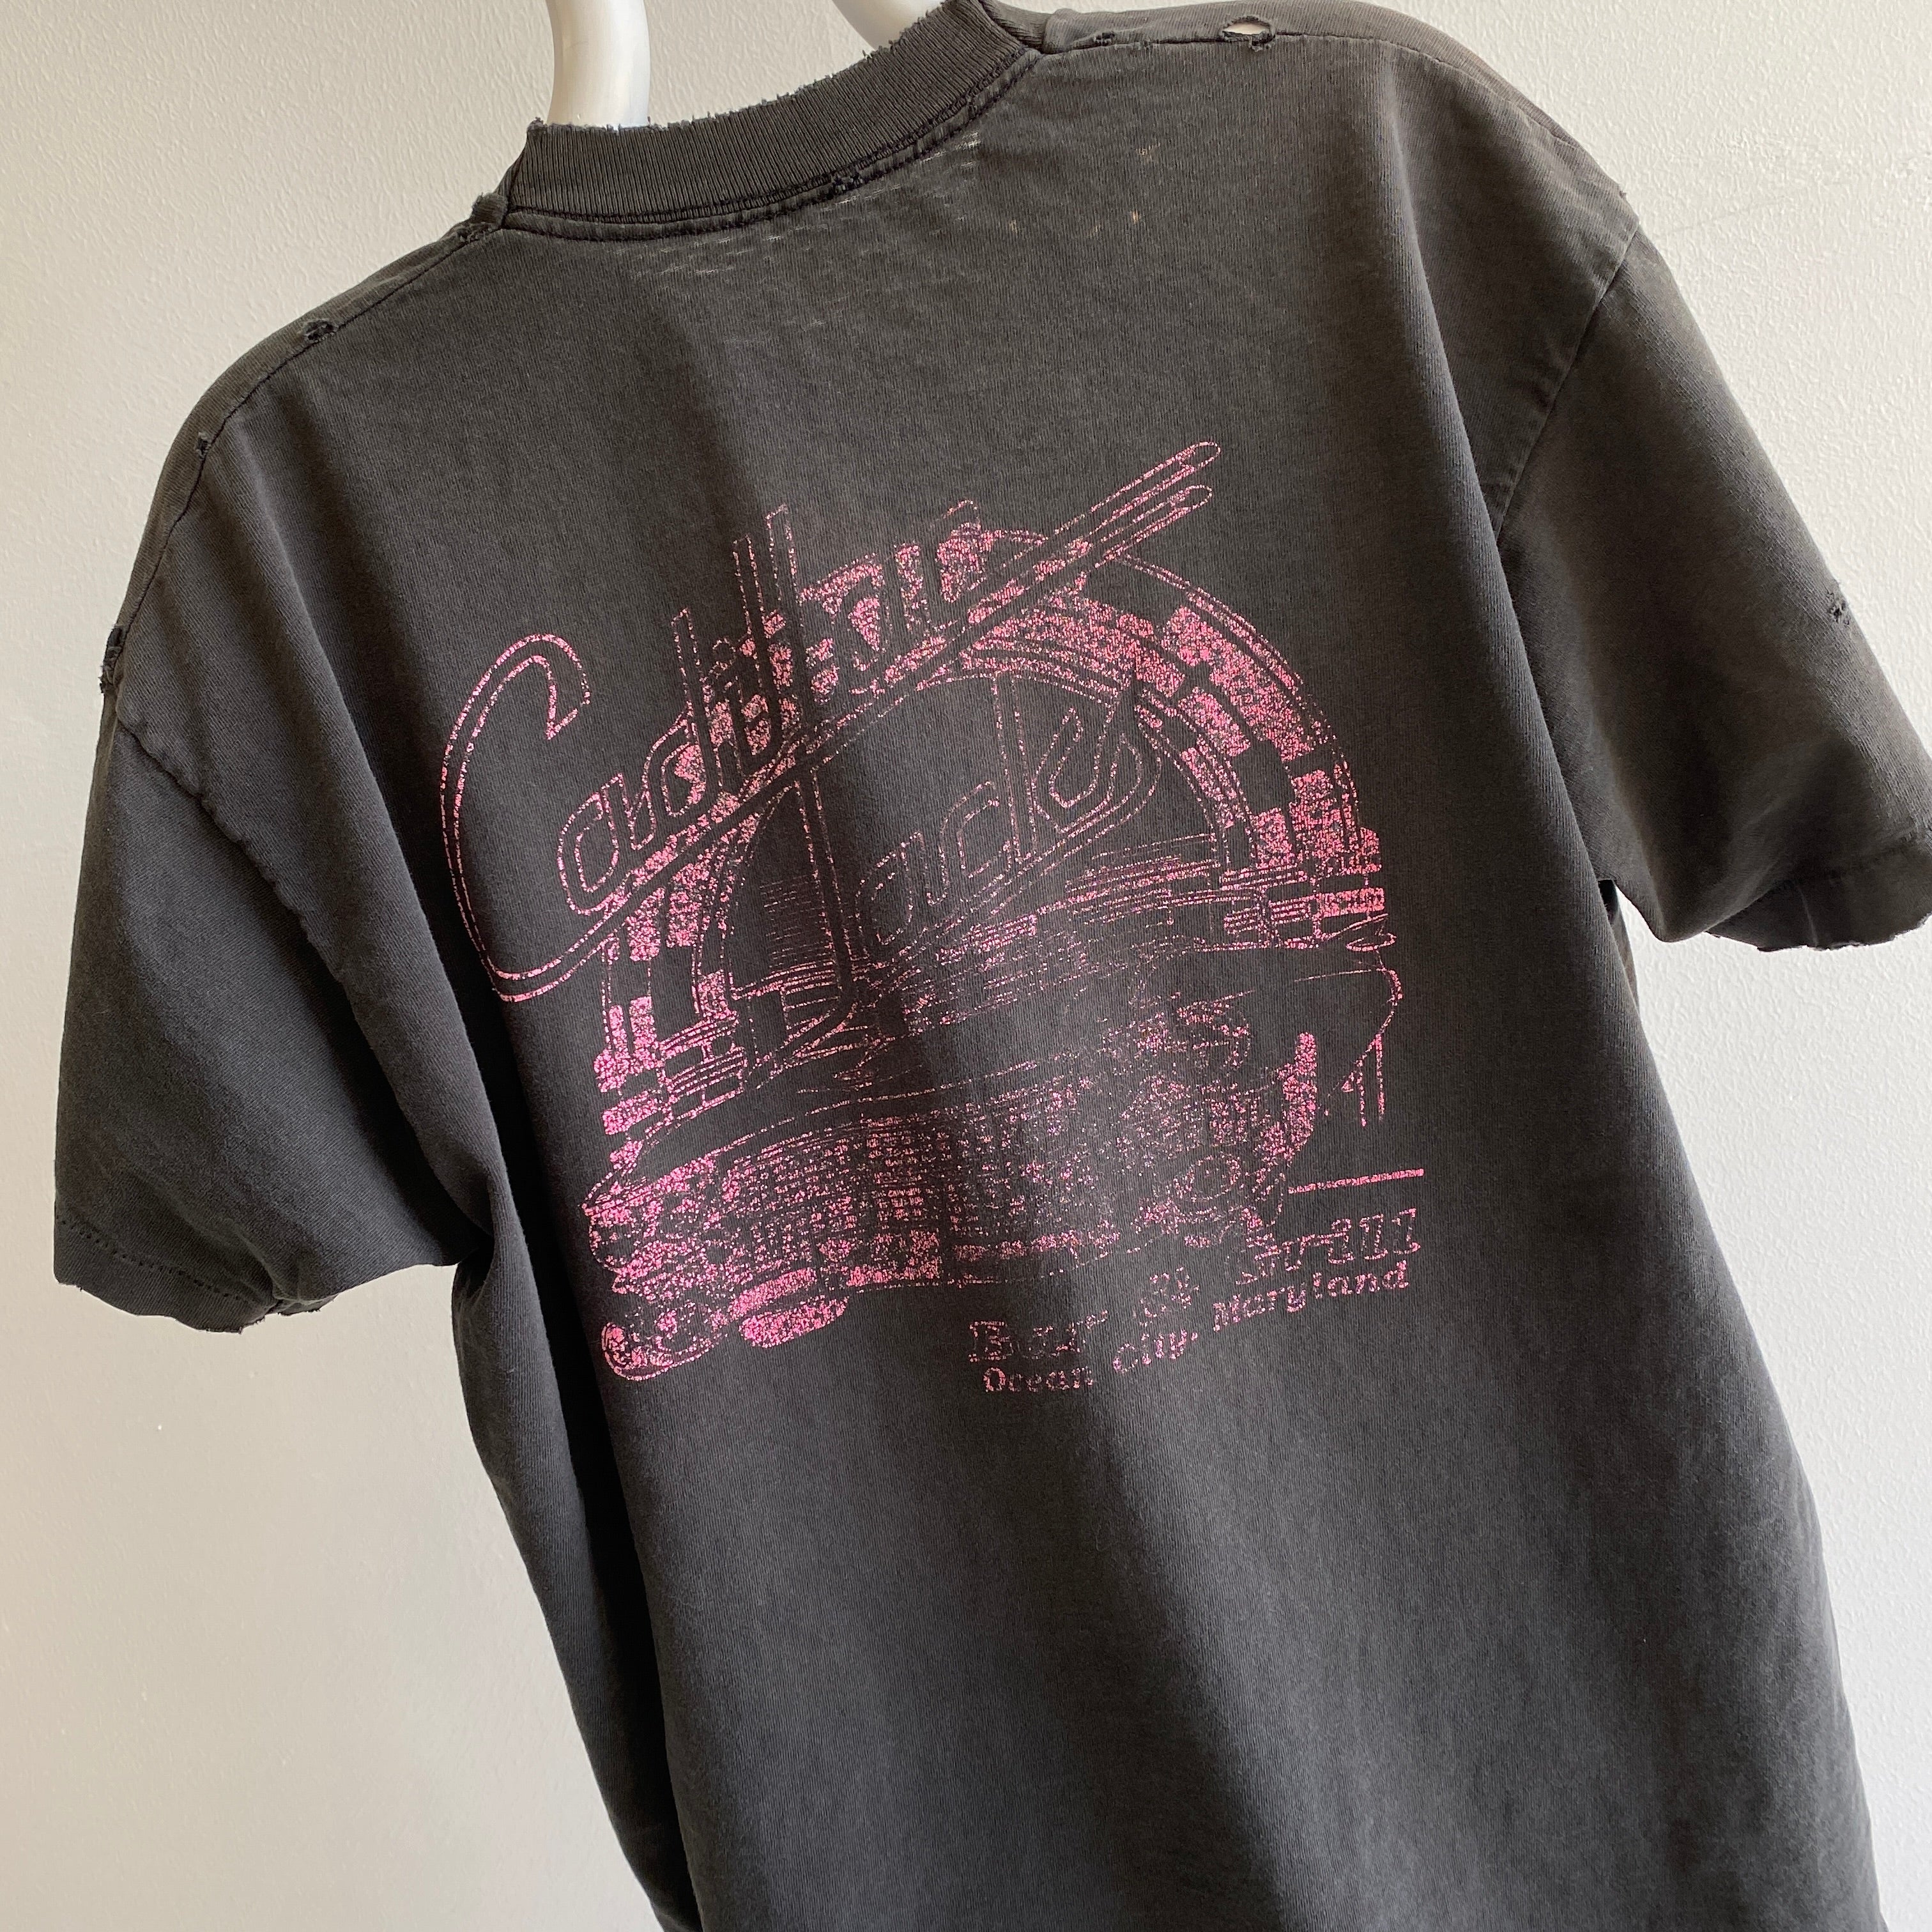 Cadillac Jack's Ultra Faded and Beat Up Pocket Tee des années 1980 - The Backside Too !!